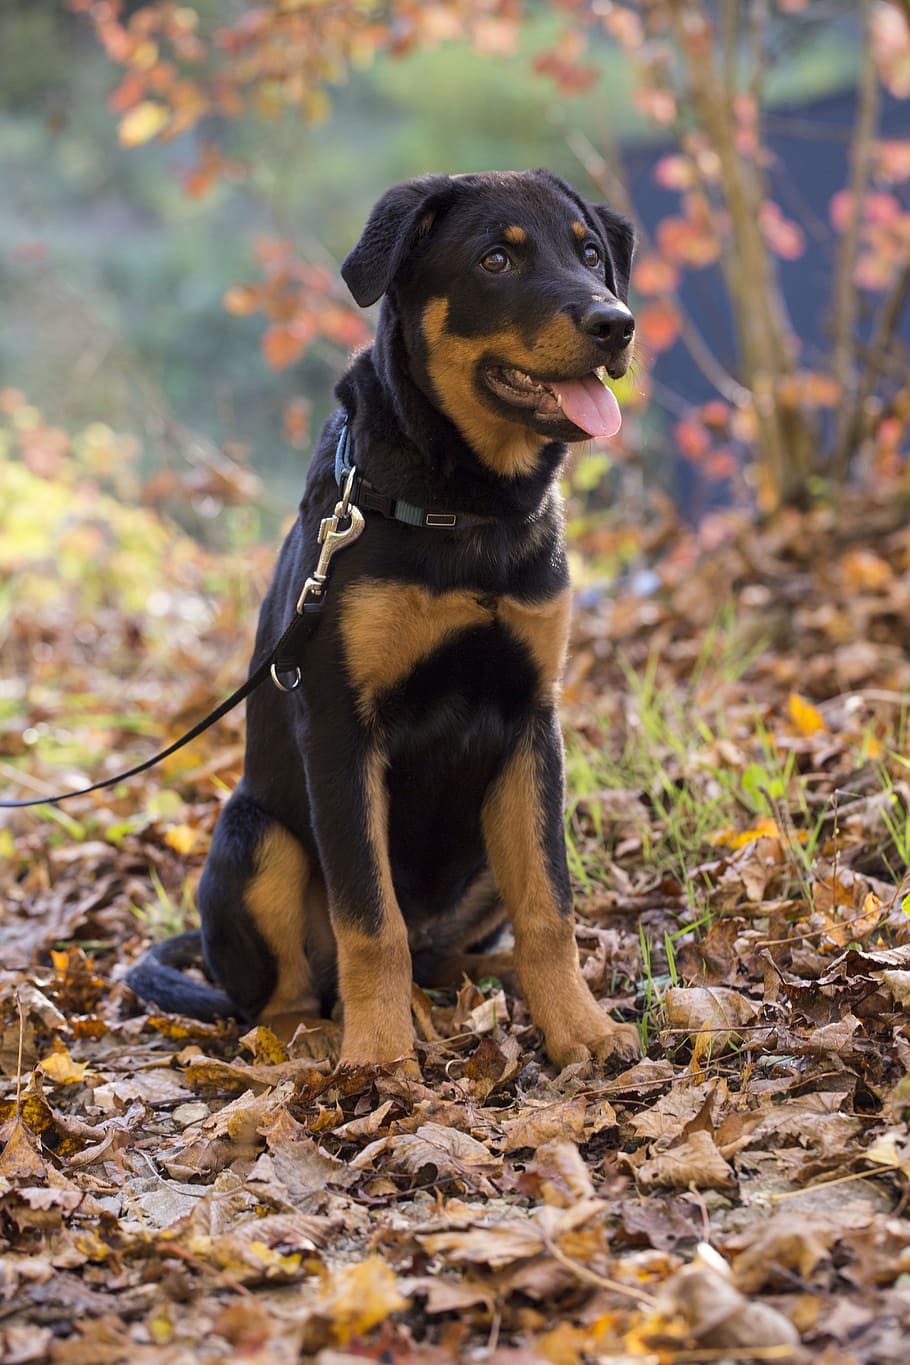 rottweiler, dog, pet, animal, hundeportrait, snout, peaceful, obedience, nature, one animal